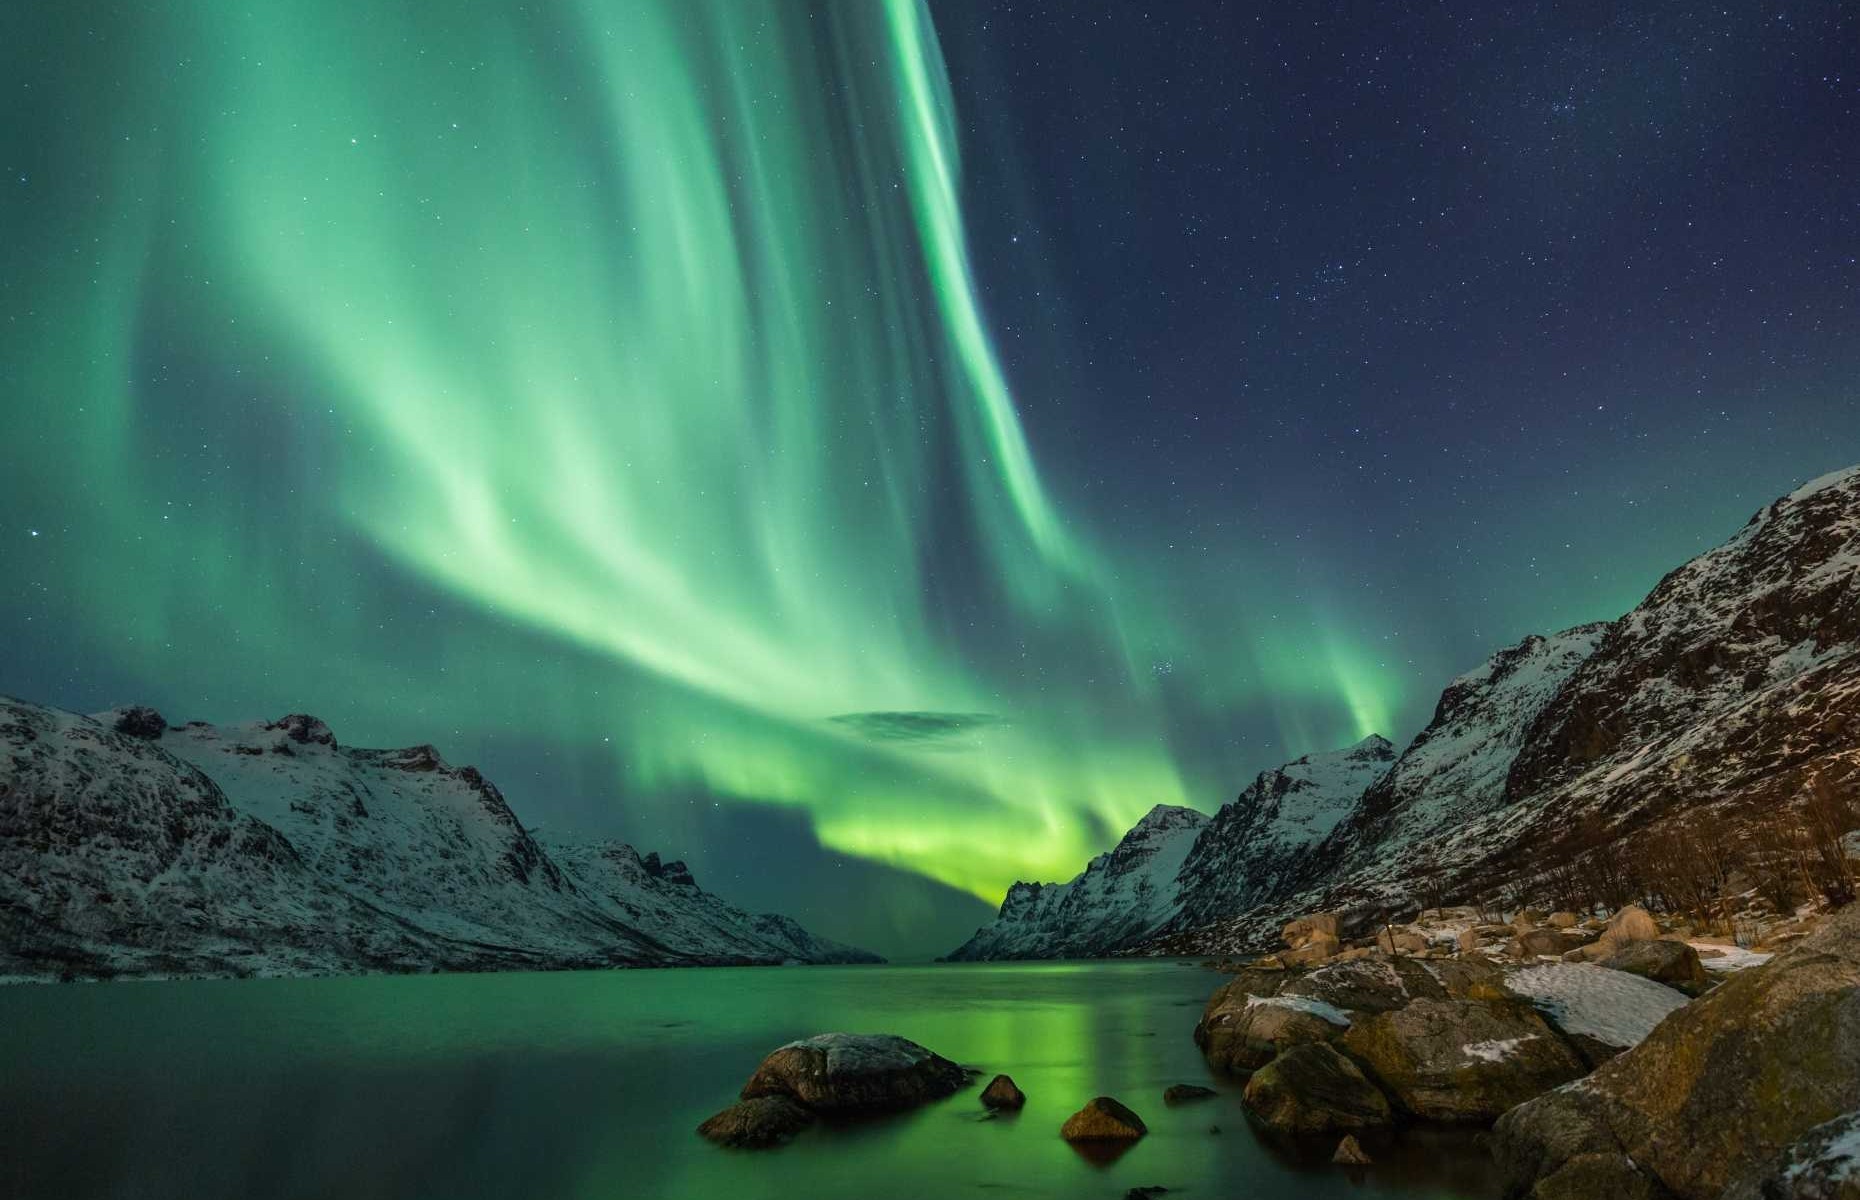 <p>There are only a select handful of places in the world where the aurora borealis is visible, and <a href="https://www.travelandleisure.com/trip-ideas/nature-travel/iceland-when-to-see-northern-lights">Iceland</a> is a place you can experience it in <a href="https://www.earthtrekkers.com/iceland-bucket-list-best-things-to-do-in-iceland/">between</a> day trips to stunning waterfalls, lagoons and volcanoes. If the northern lights are top of your priority list, <a href="https://www.visiticeland.com/article/northern-lights-in-iceland">booking between</a> September and April is your best bet, though budget accordingly: the average cost of an Iceland trip is between $90 and $290 per day, making it one of the pricier options for travel in 2023.</p>